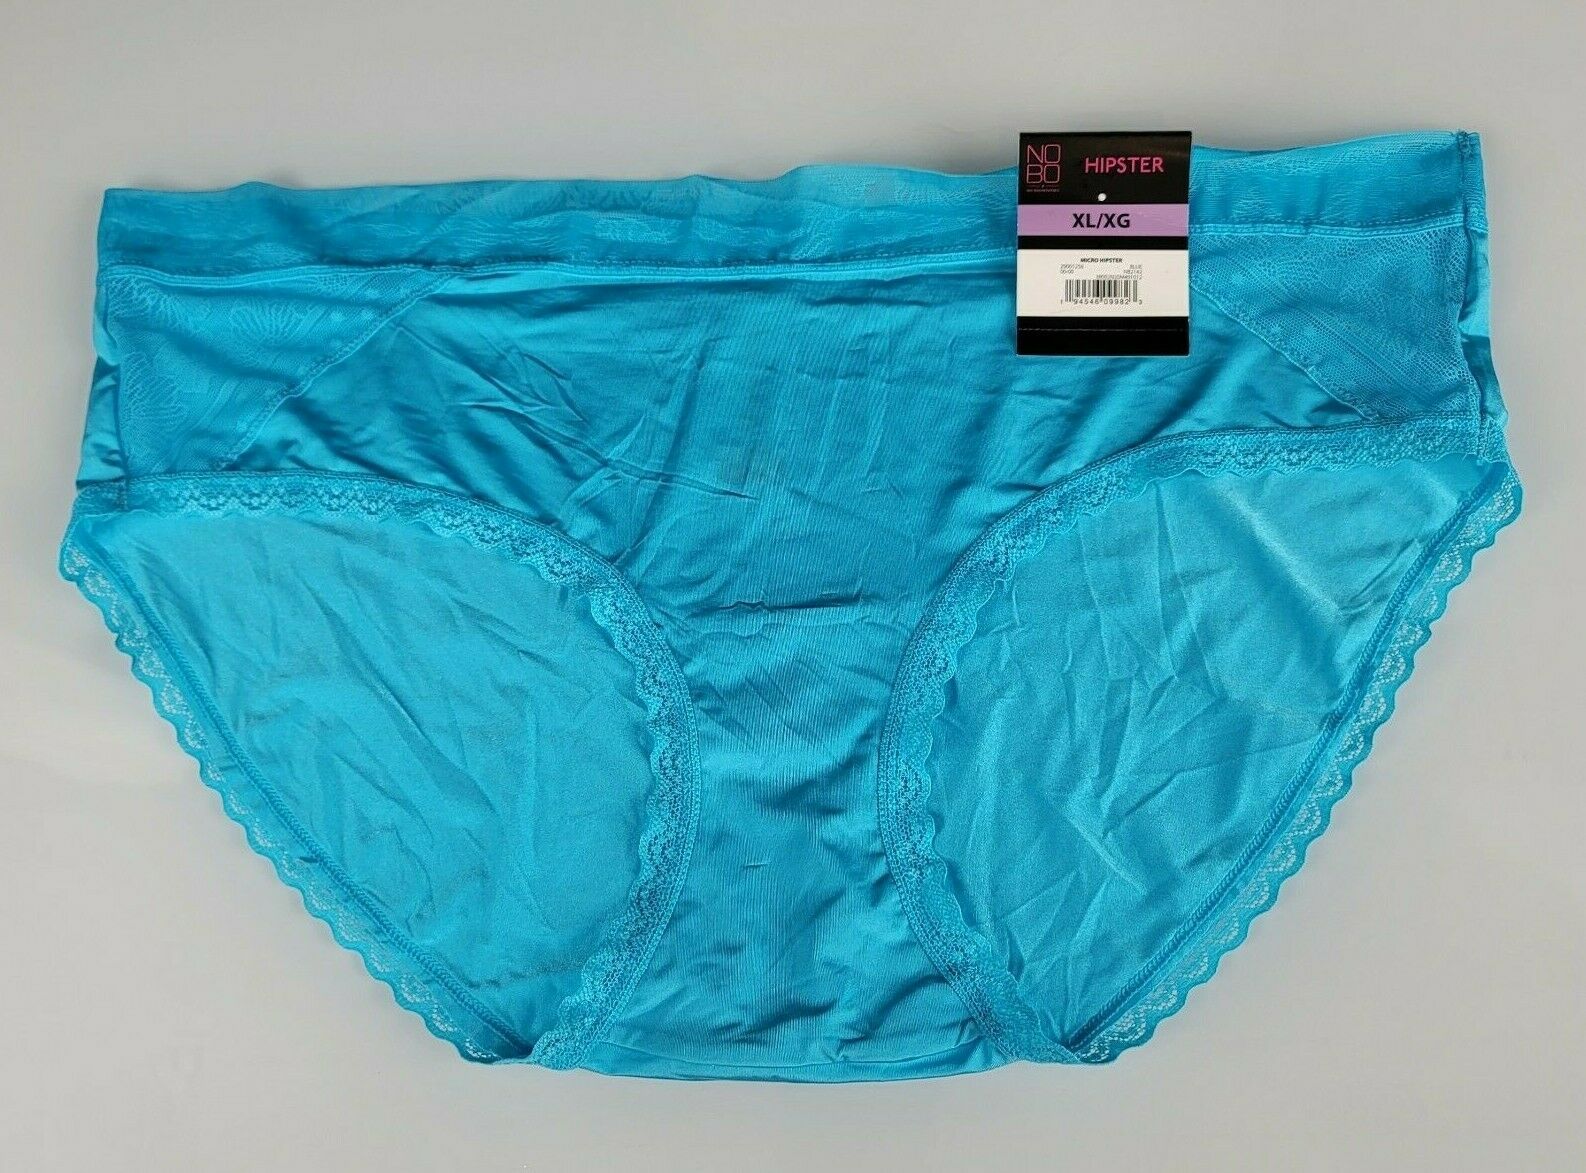 Primary image for NOBO Aqua Teal Blue Silky Satiny Panties Lace Waistband XL 9 NEW Women